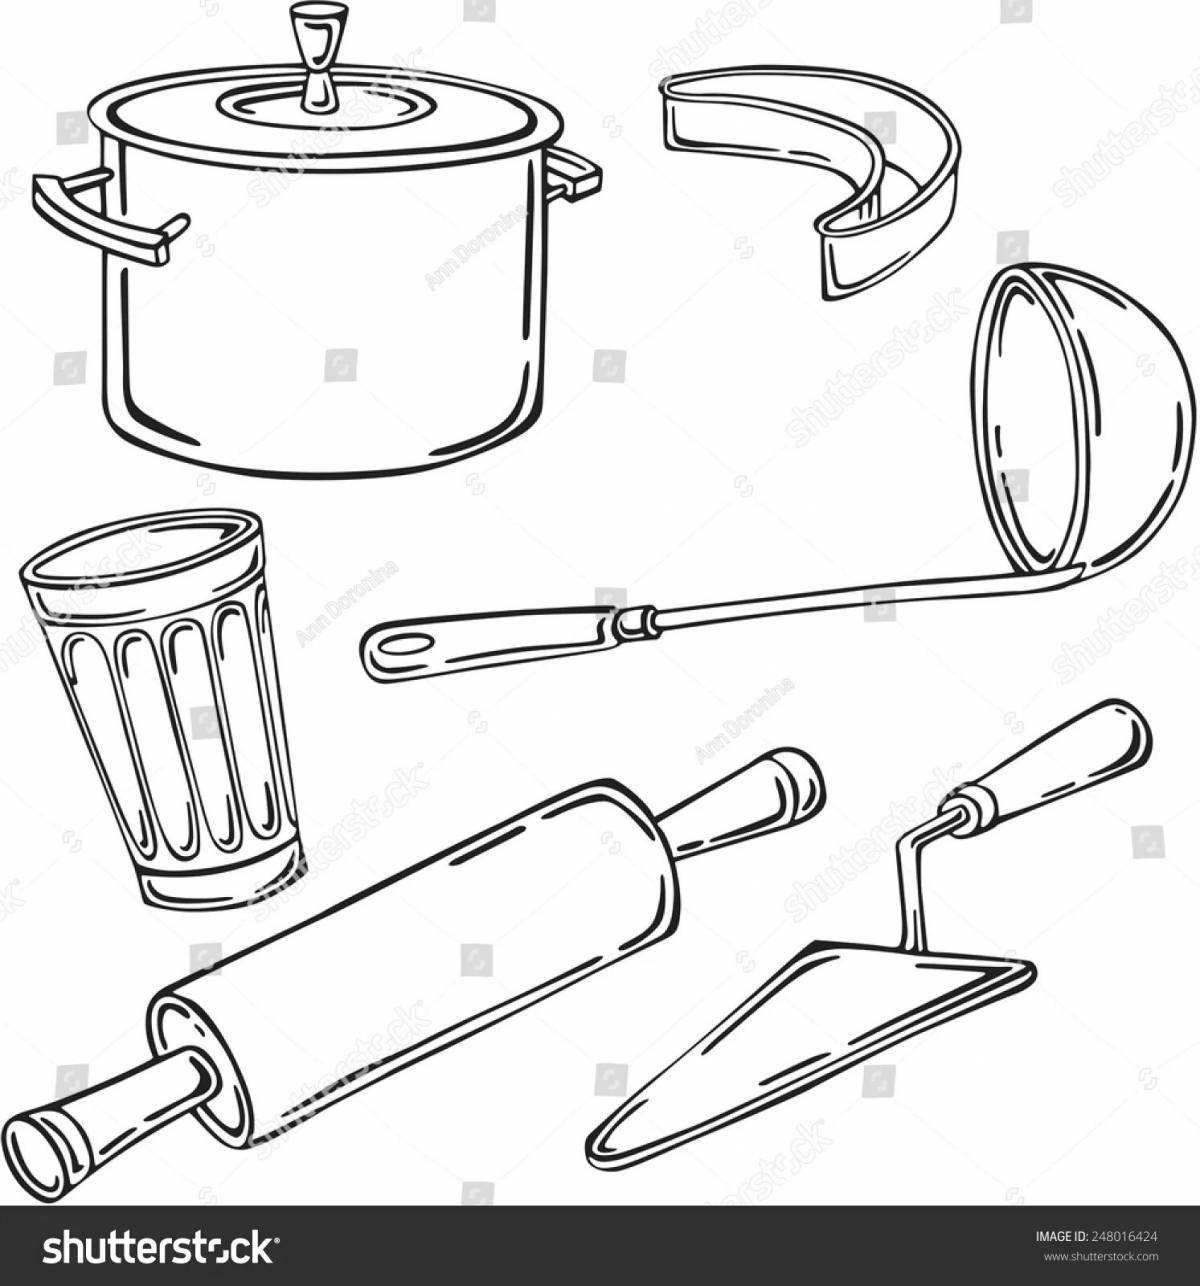 Detailed coloring page of cook tools